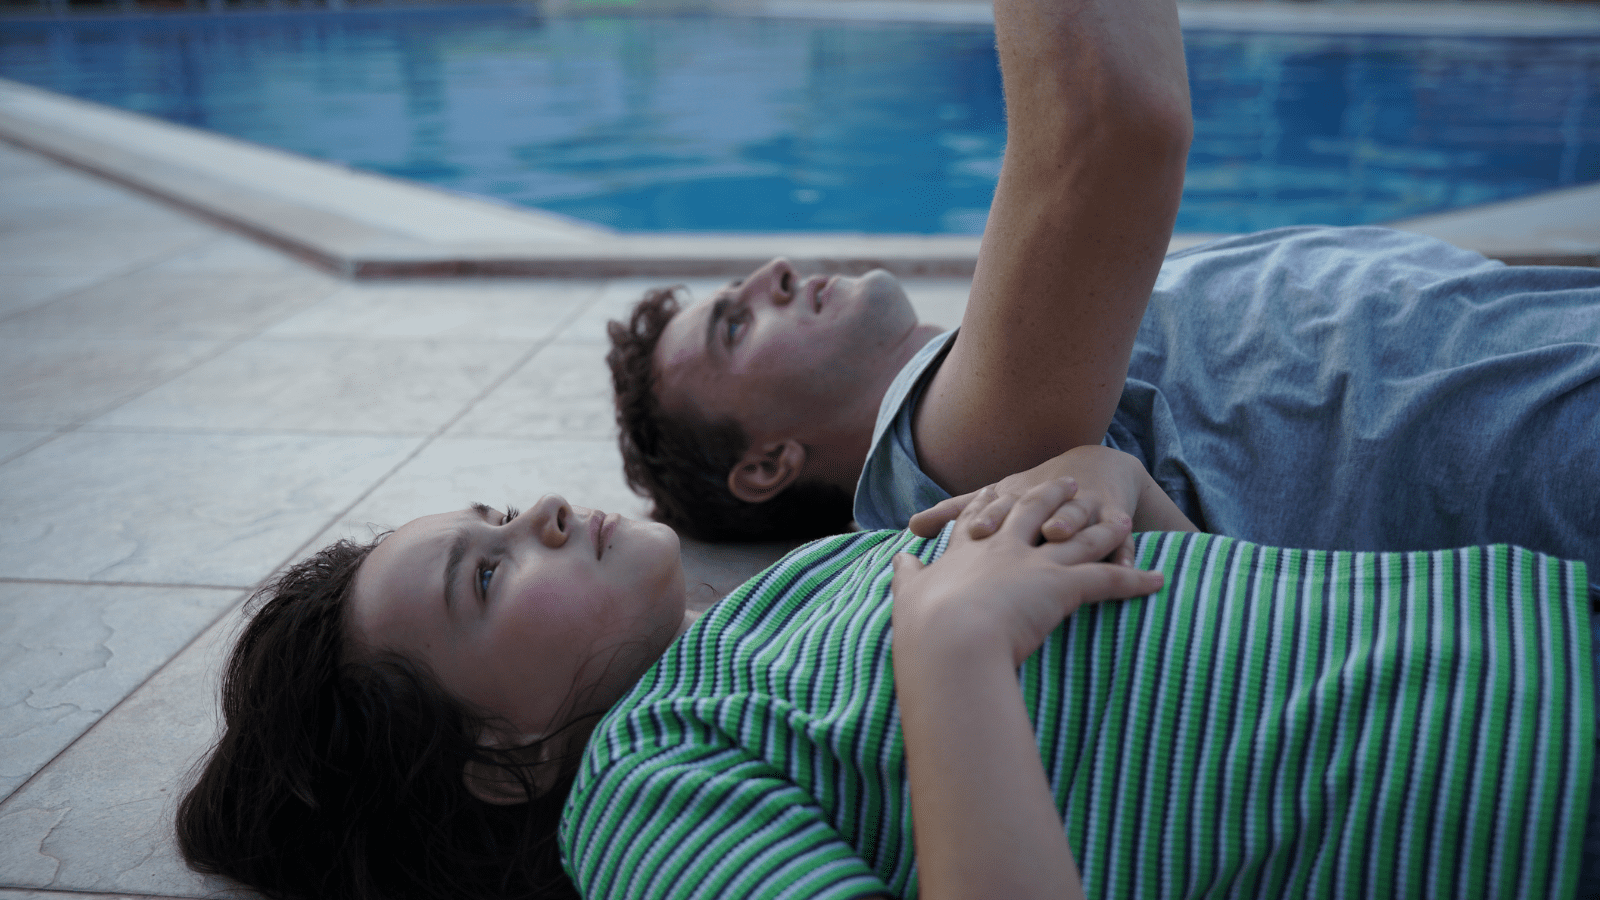 A still from Aftersun - a young girl in a green striped t-shirt lies on the tiled floor surrounding a pool next to an older man in a blue shirt.